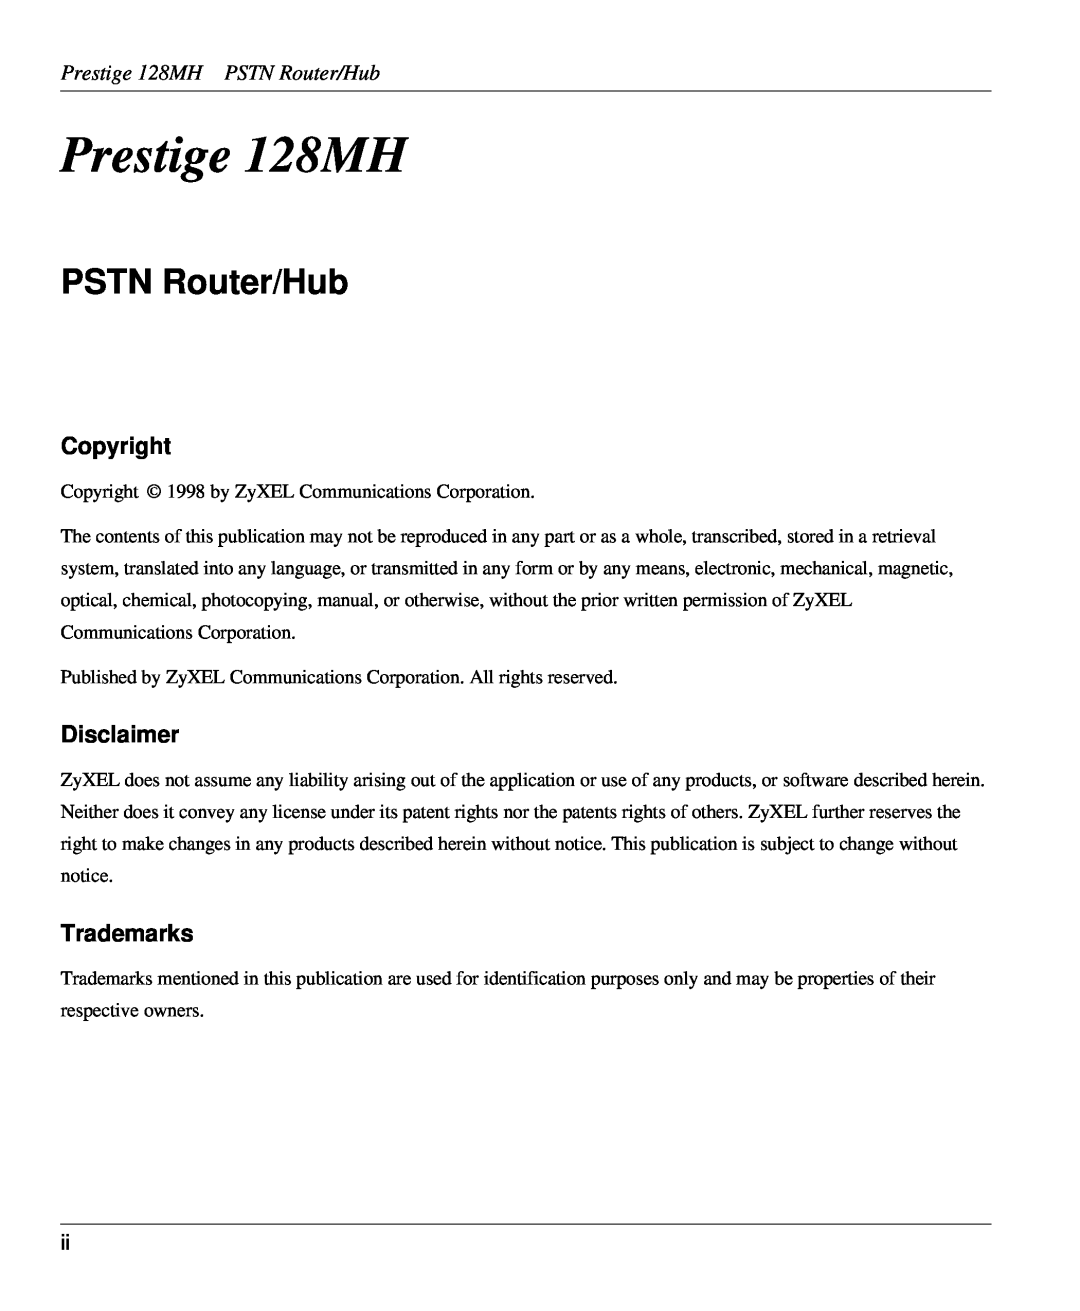 ZyXEL Communications user manual Copyright, Disclaimer, Trademarks, Prestige 128MH PSTN Router/Hub 